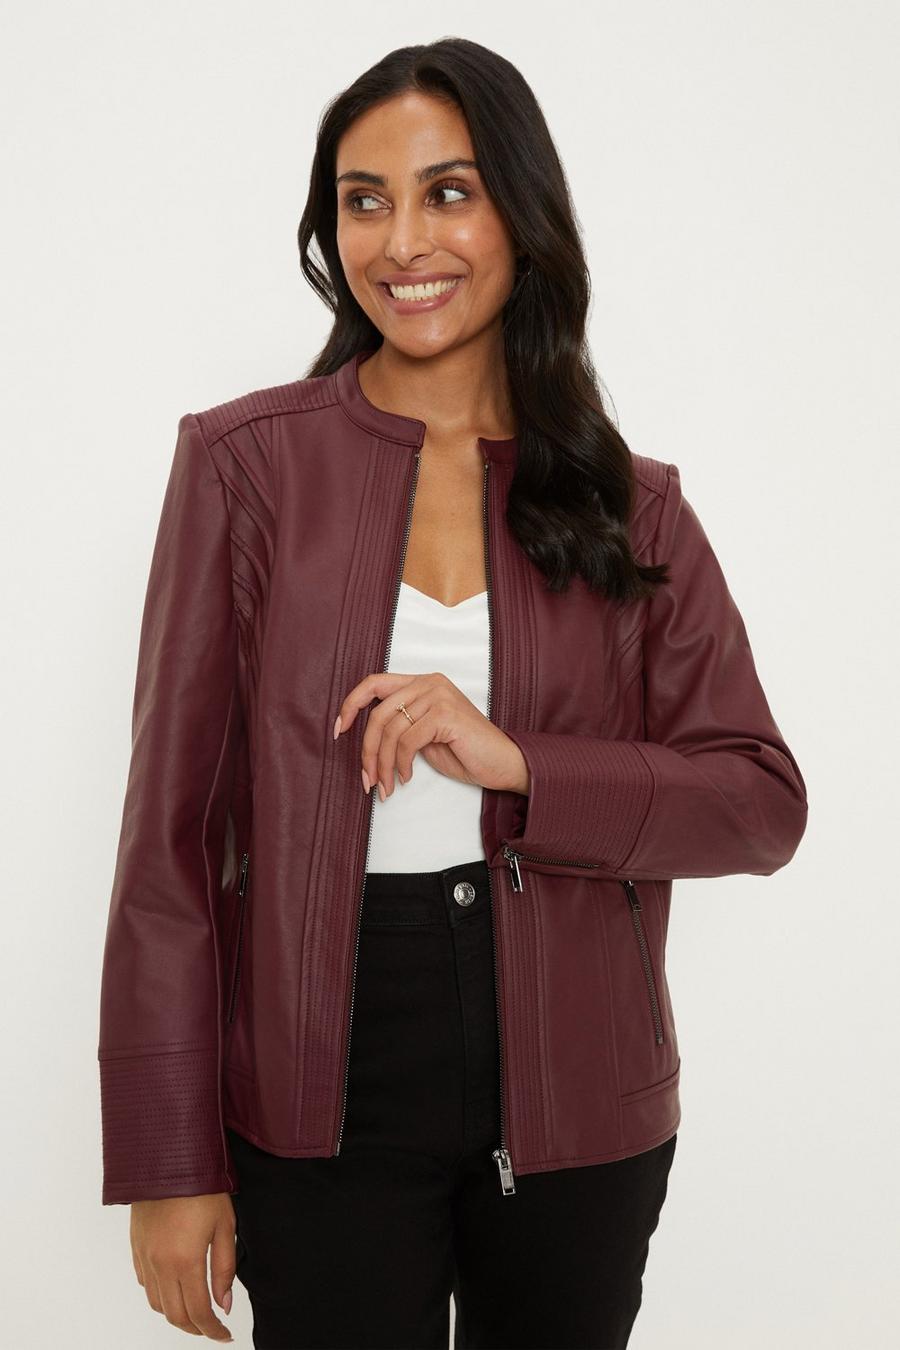 Petite Berry Faux Leather Seam Detail Jacket